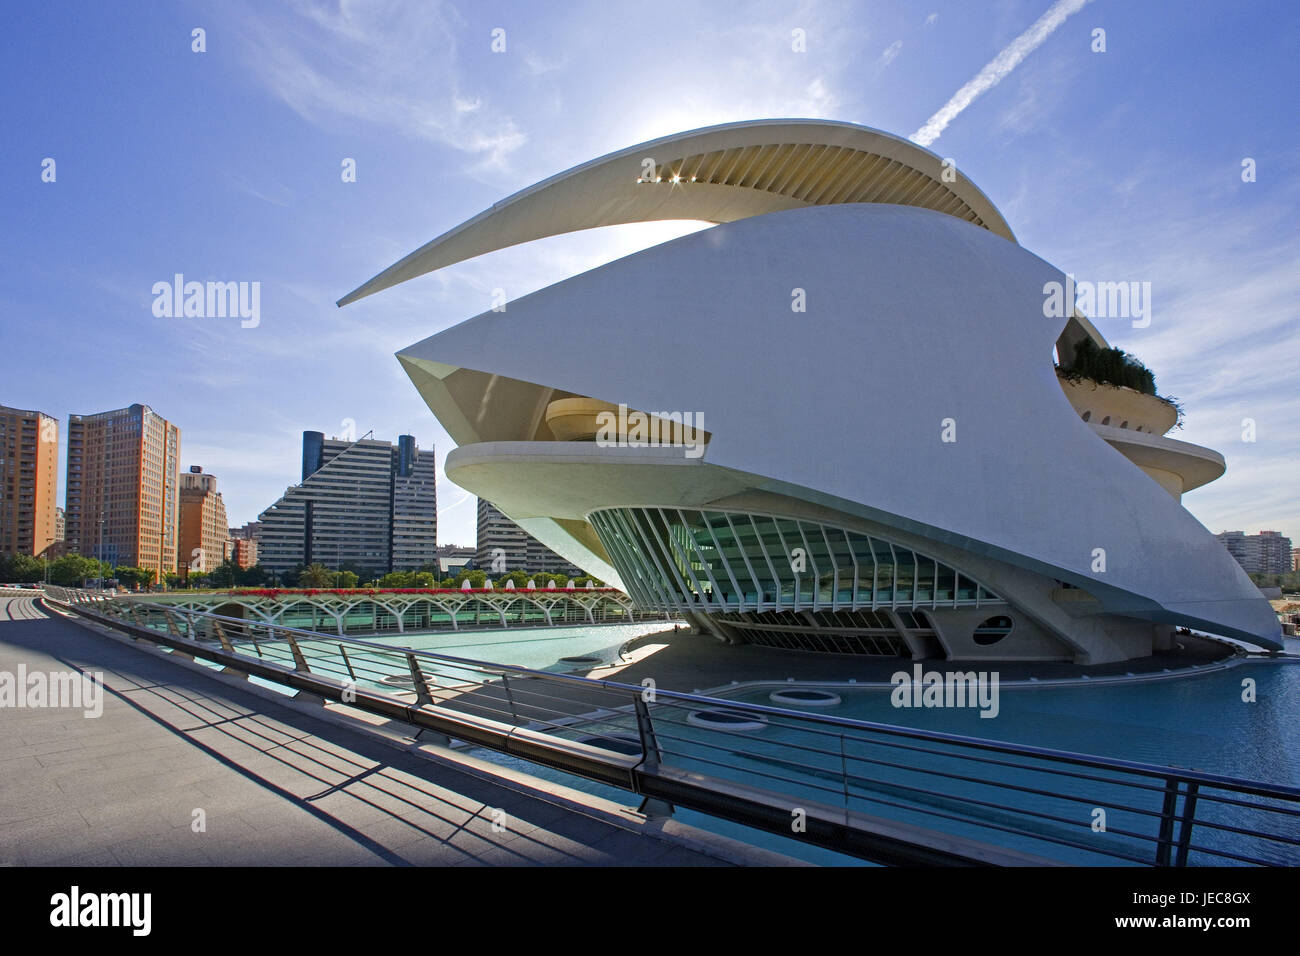 Spain, Valencia, Ciudad de read Artes Y read Ciencias', Palau de les Arts Reina Sofia, opera, fountain, cultural park, subject park, outside areas, uncovered areas, structures, buildings, architecture, avant-garde, modern, music palace, opera, opera-house, construction, place of interest, destination, tourism, play of water, basin, well, back light, Stock Photo